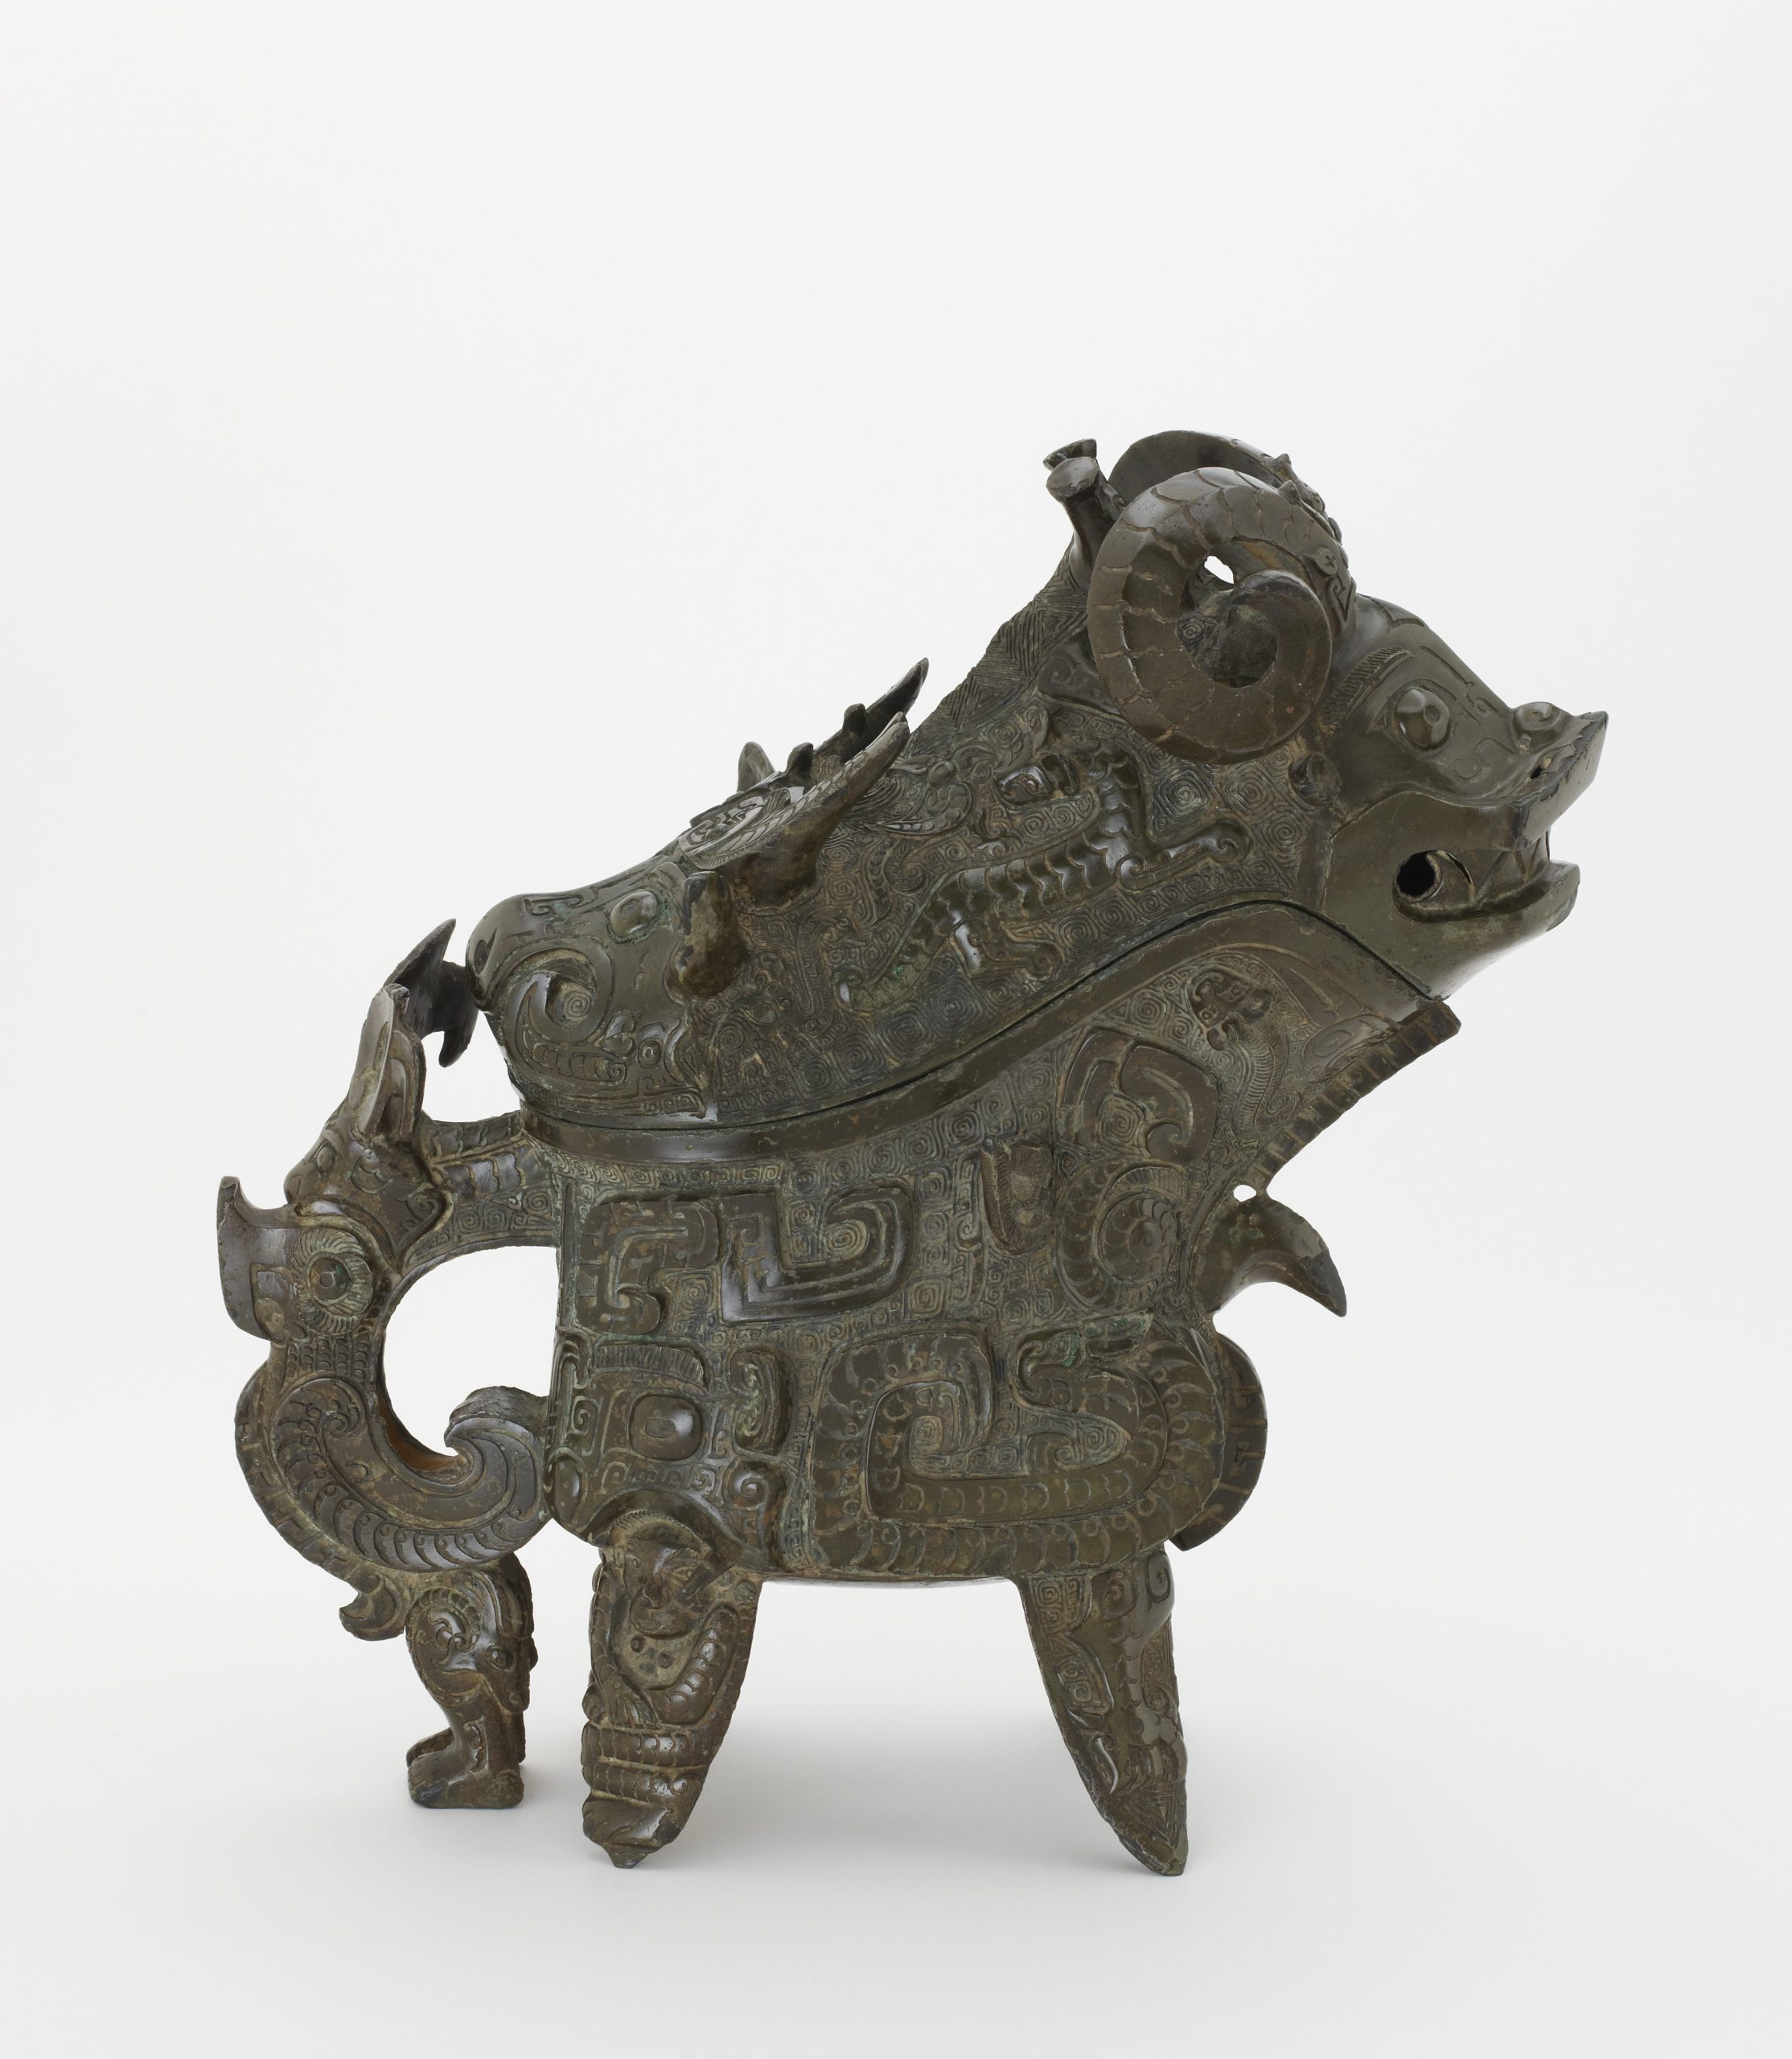 metalwork pouring vessel made up of a combination of animal characters